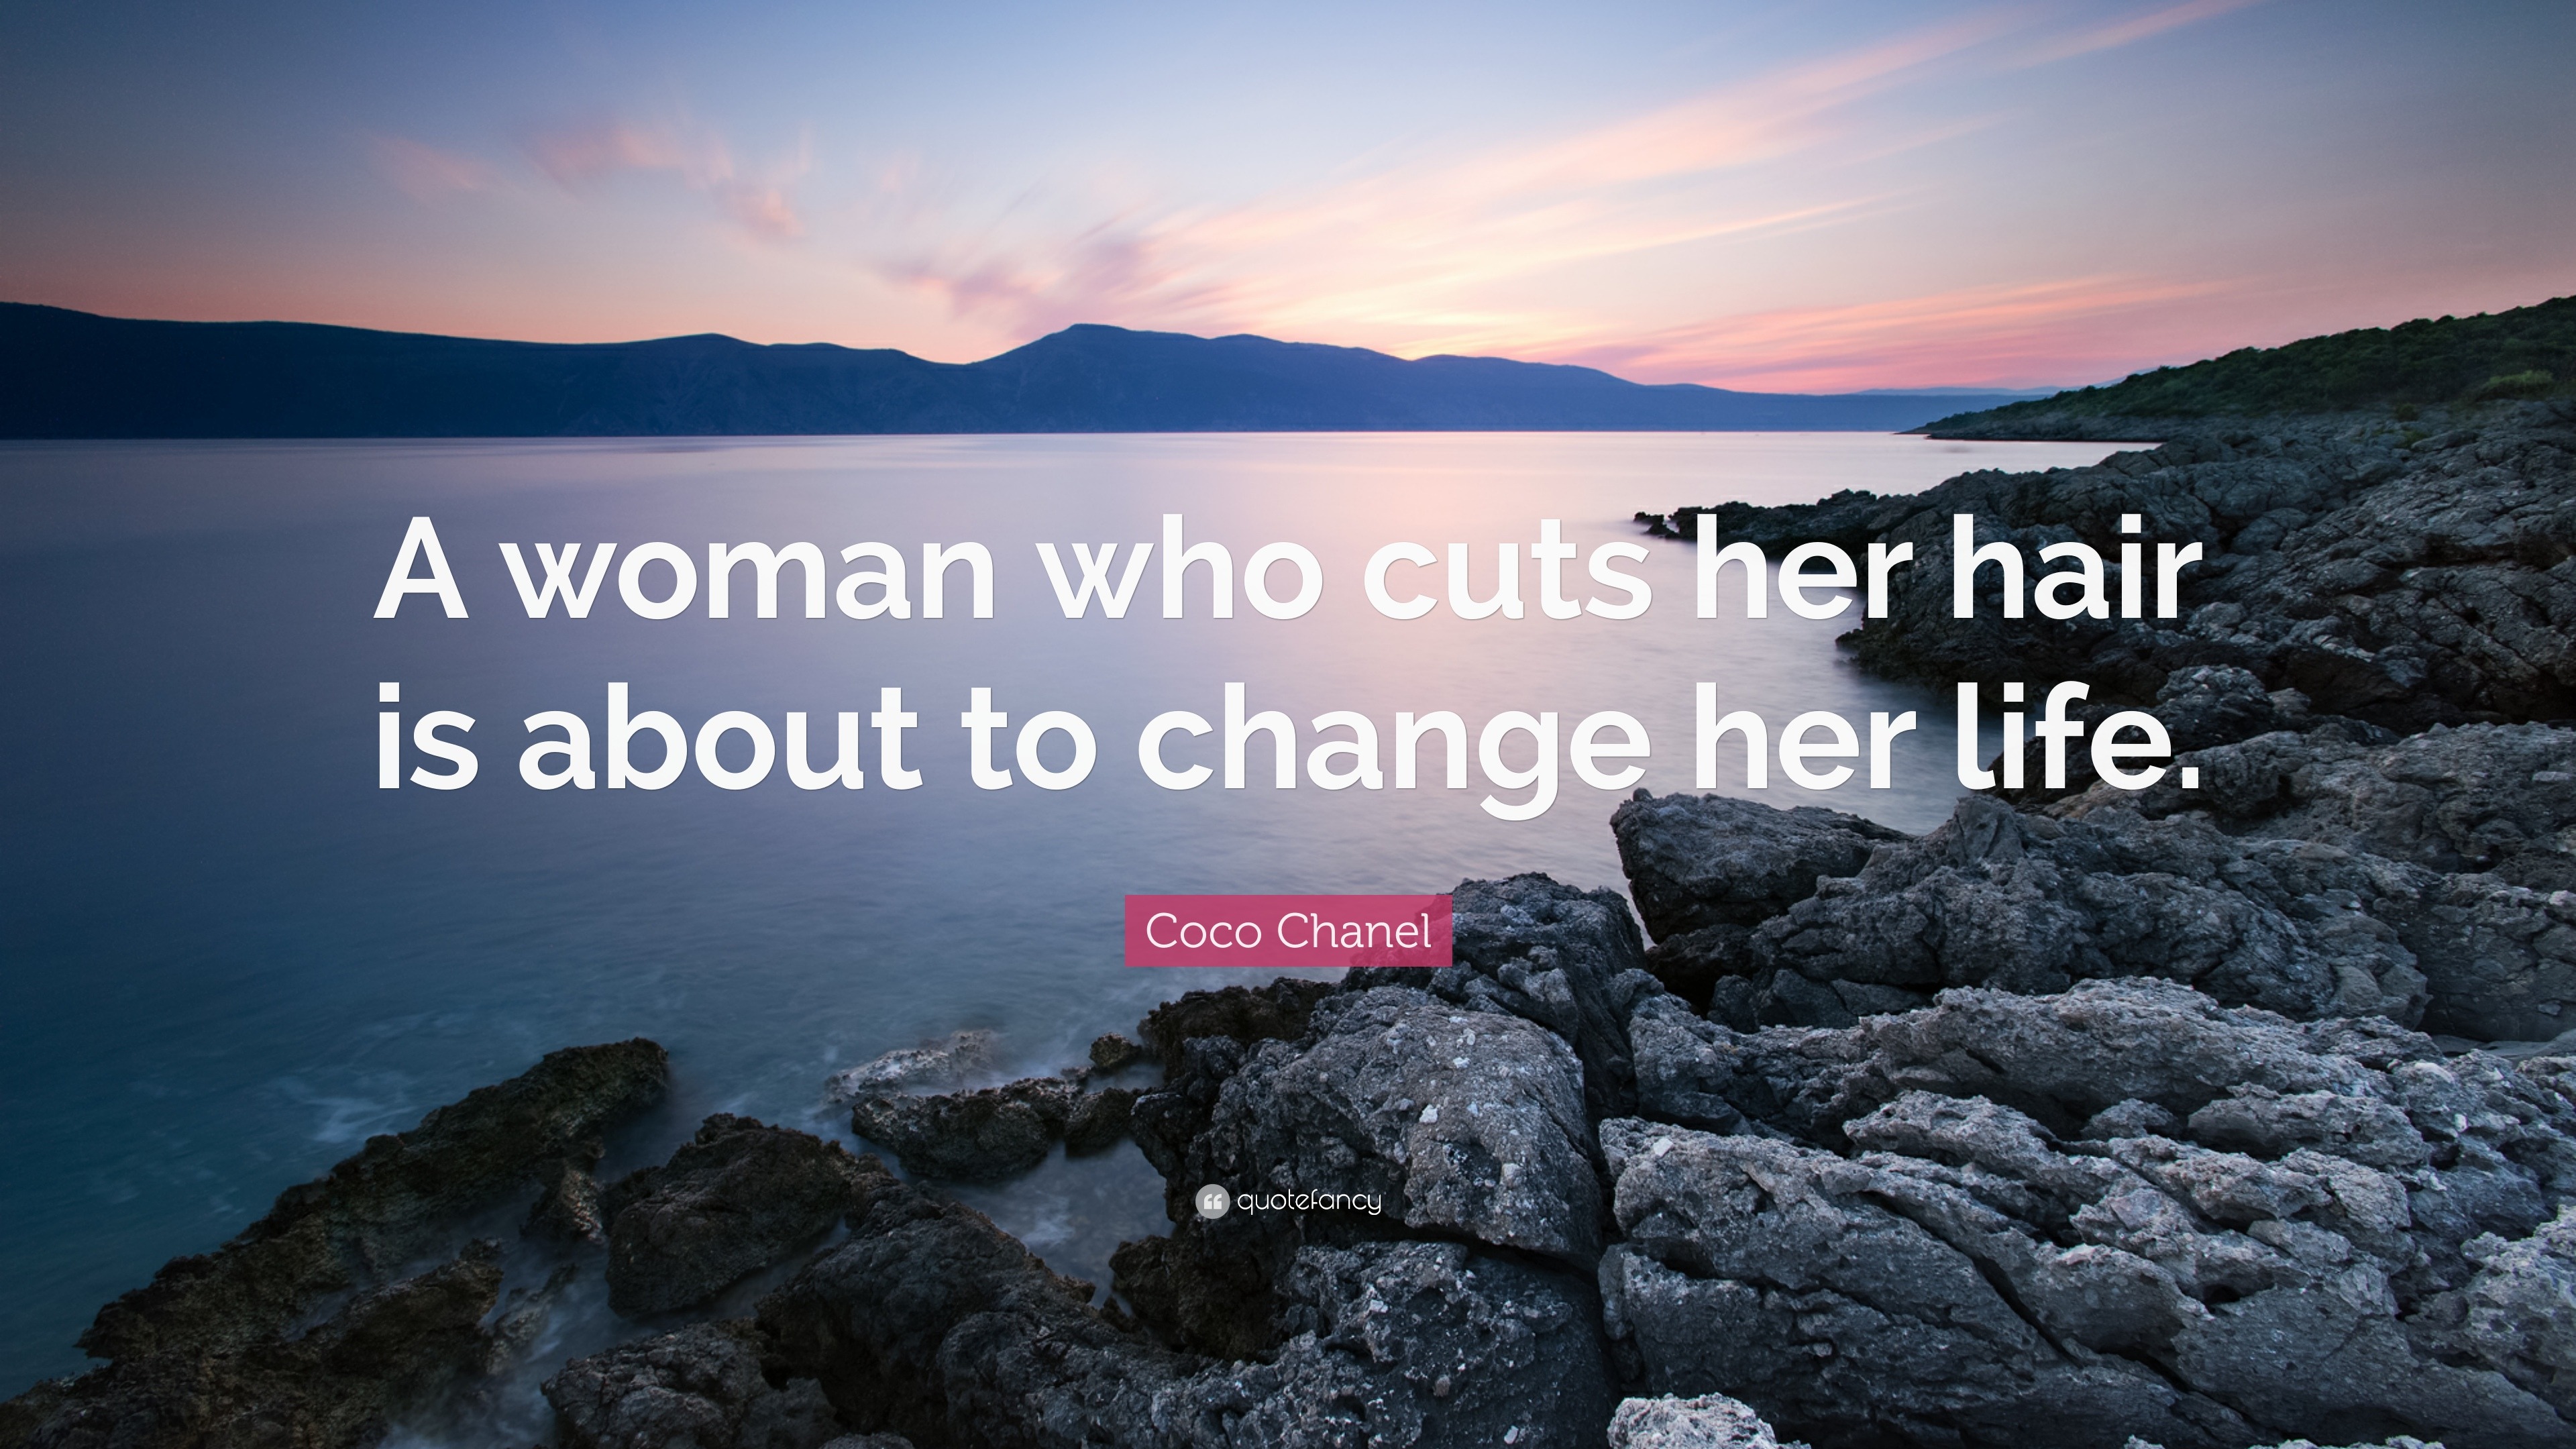 25 Best Quotes By Coco Chanel About Beauty  ThediaryforLife